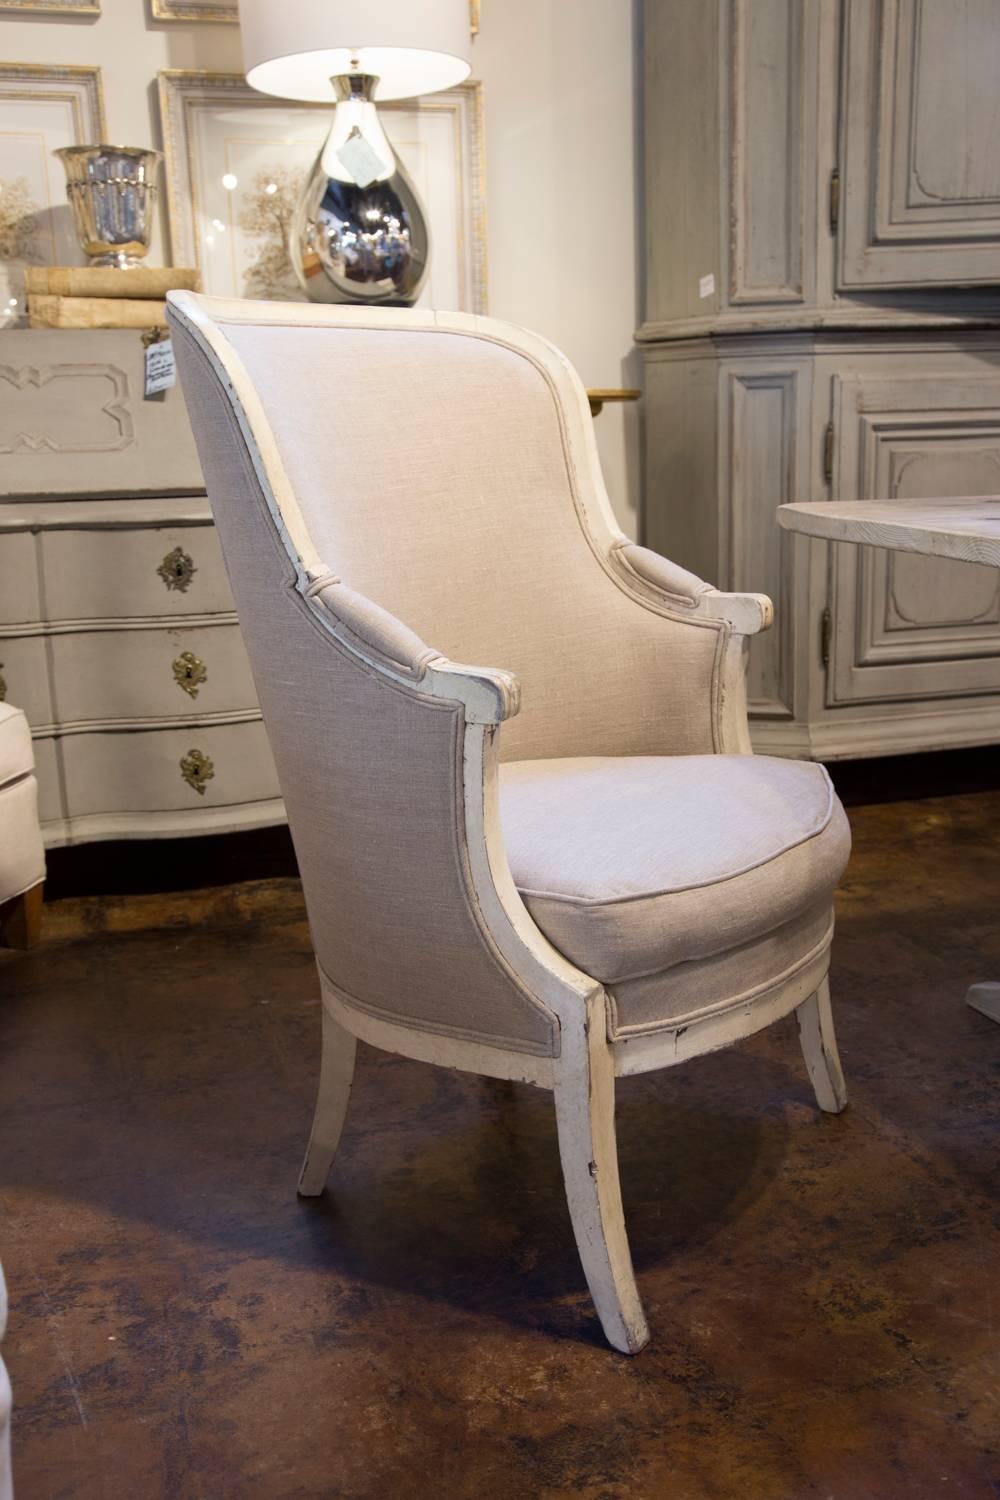 This pair of French painted wood barrel back wing chairs from the 19th century features a new French linen upholstery covering the backs and seats (with added cushion). The scrolled arms are partially upholstered. The barrel backs offer nice comfort